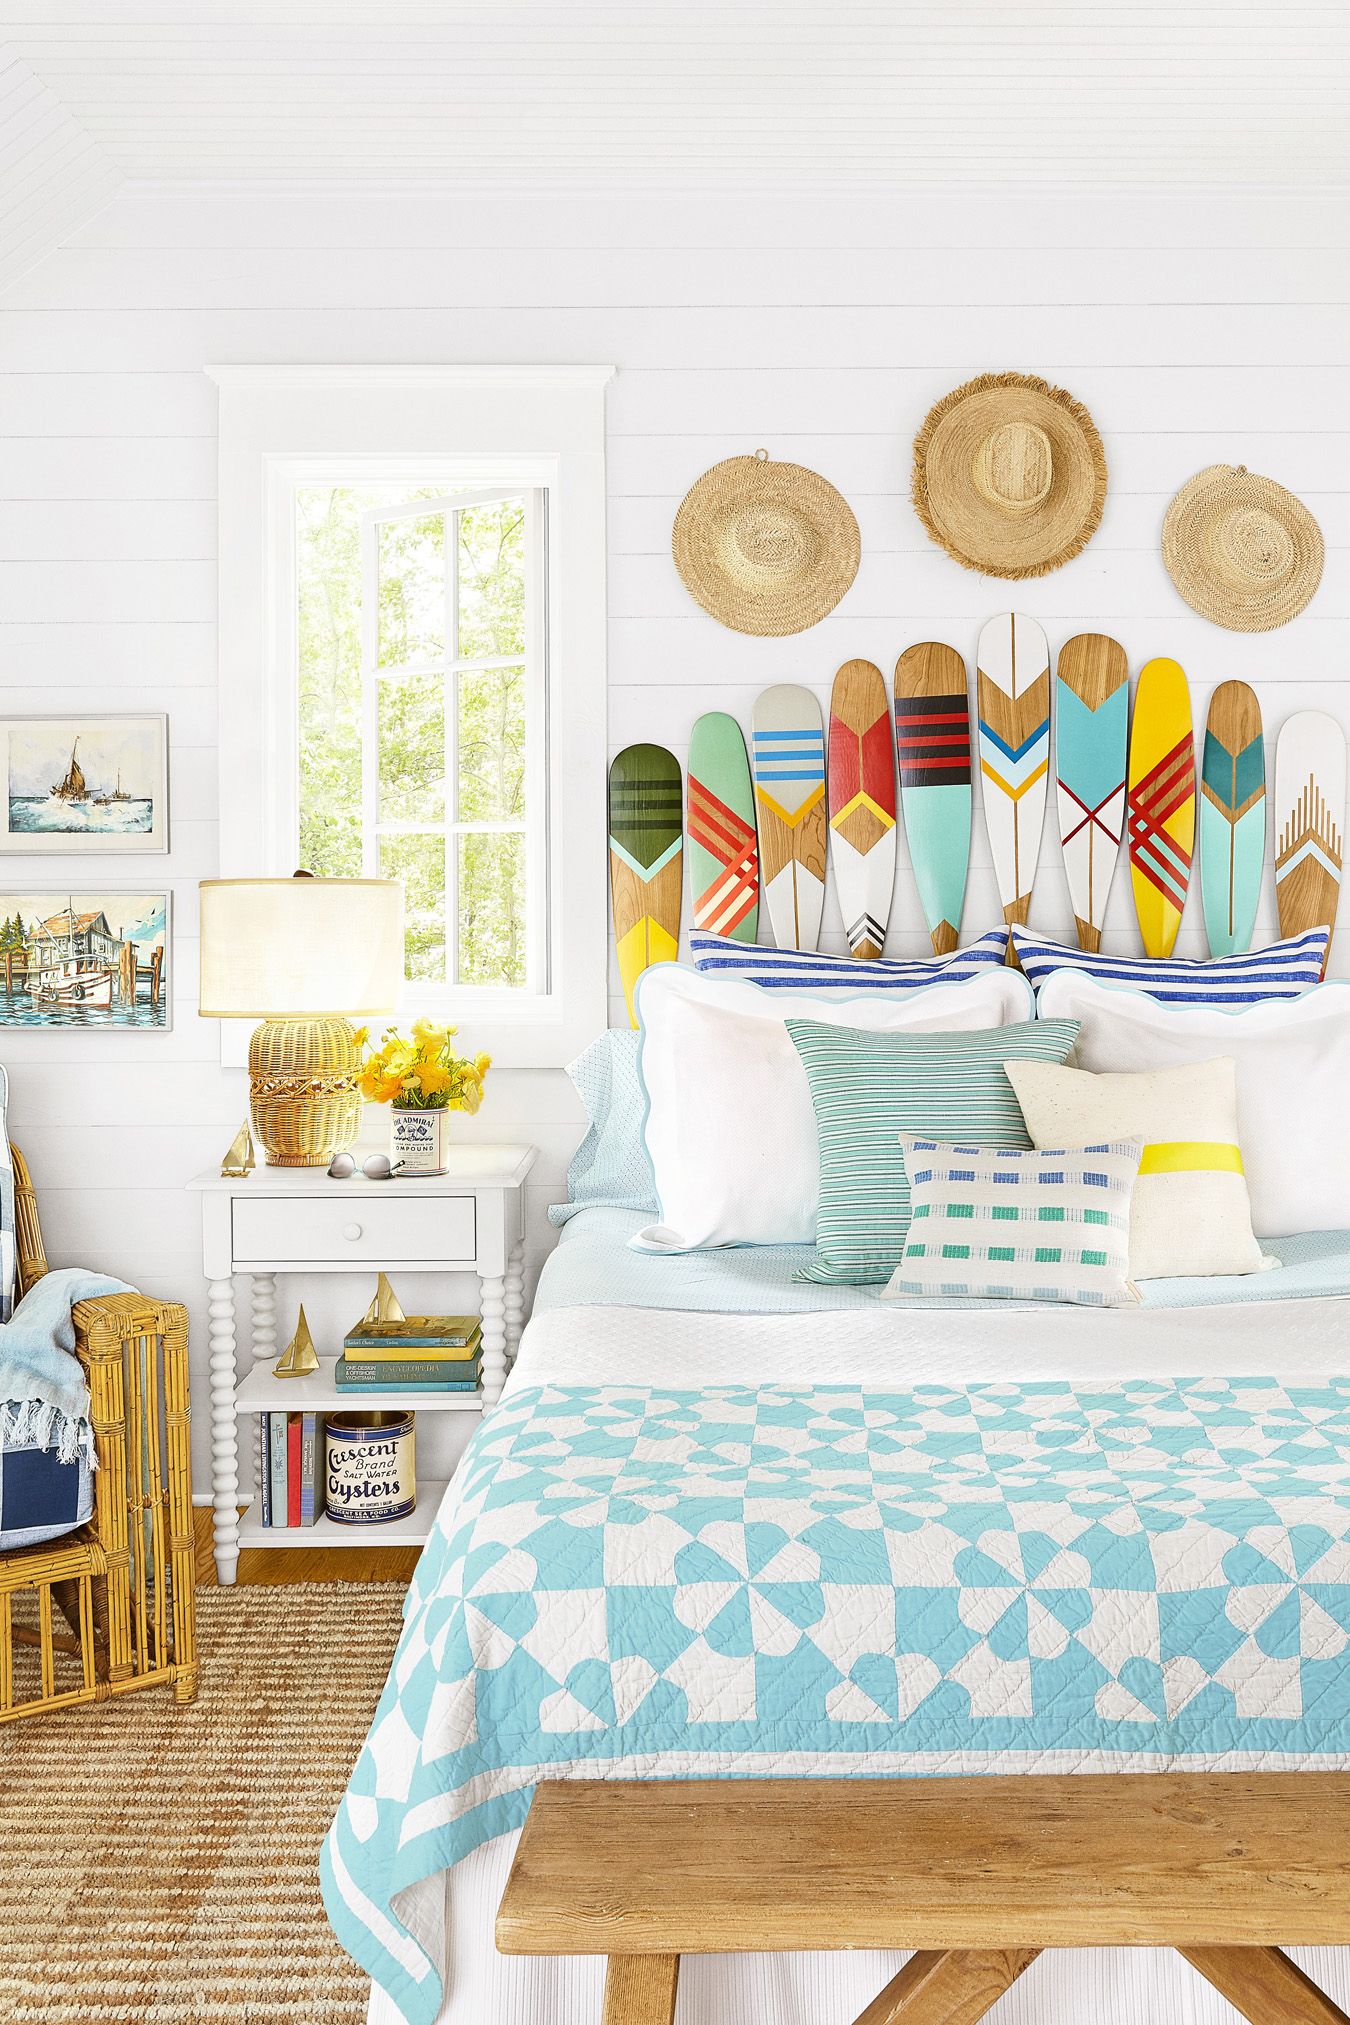 55 Fun Ways to Decorate Your Home This Summer